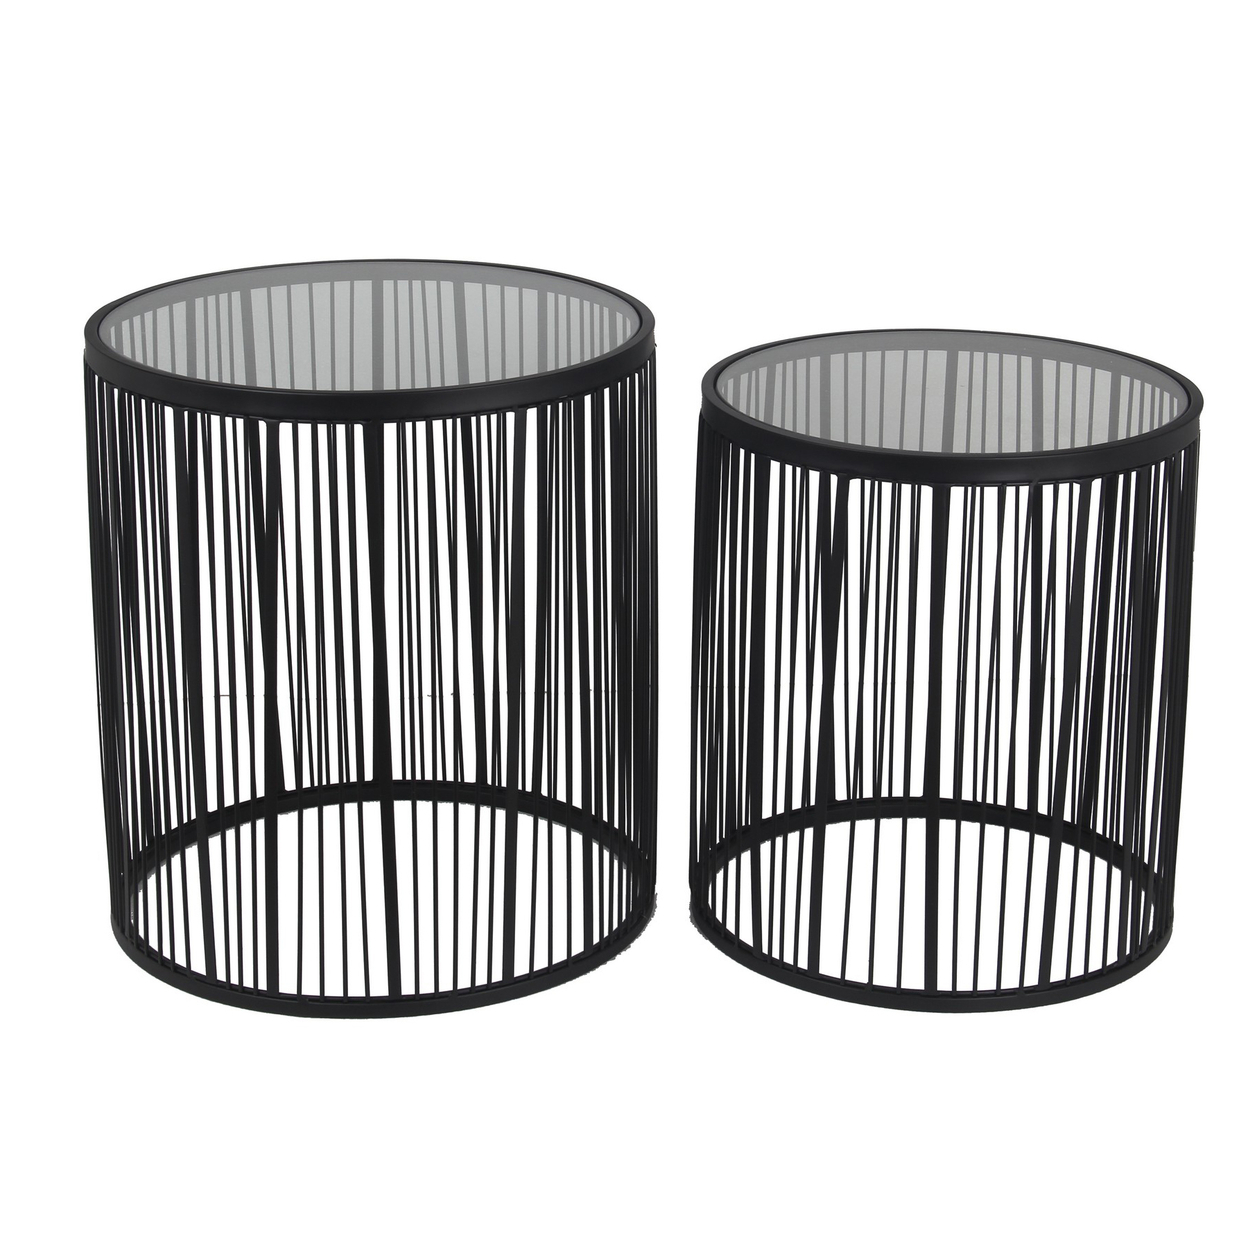 2 Piece Glass Top Accent Table With Wire Frame Design, Black- Saltoro Sherpi